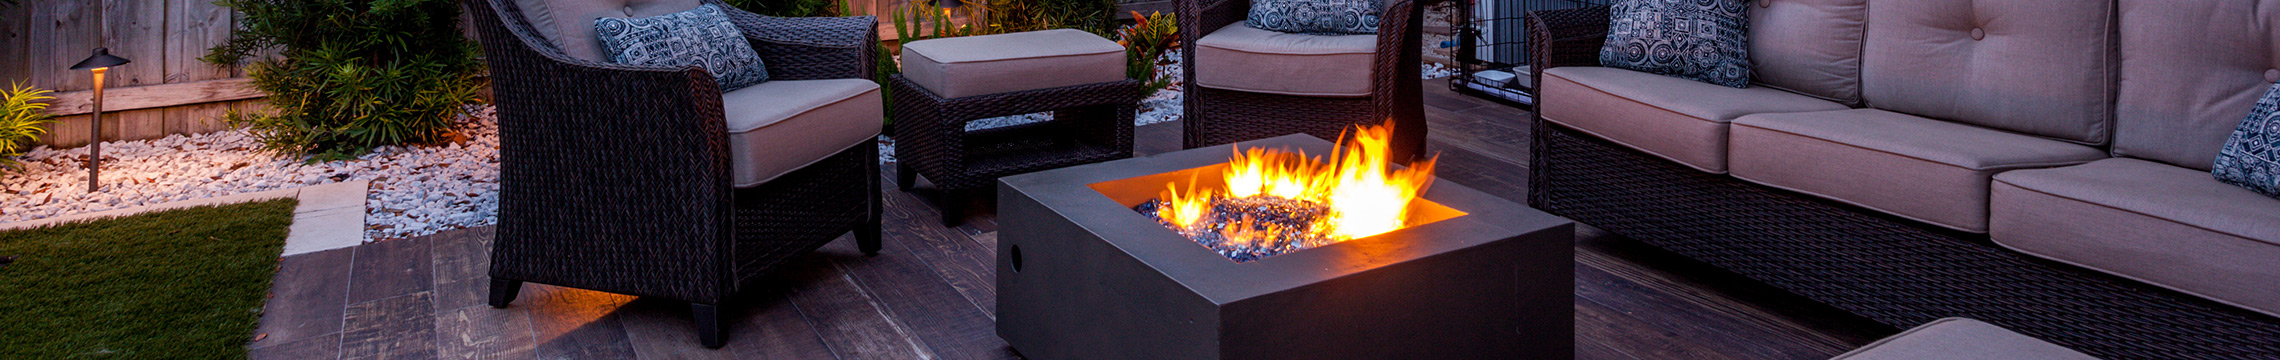 Outdoor lounge set circling a metal fire pit on a wooden deck at dusk